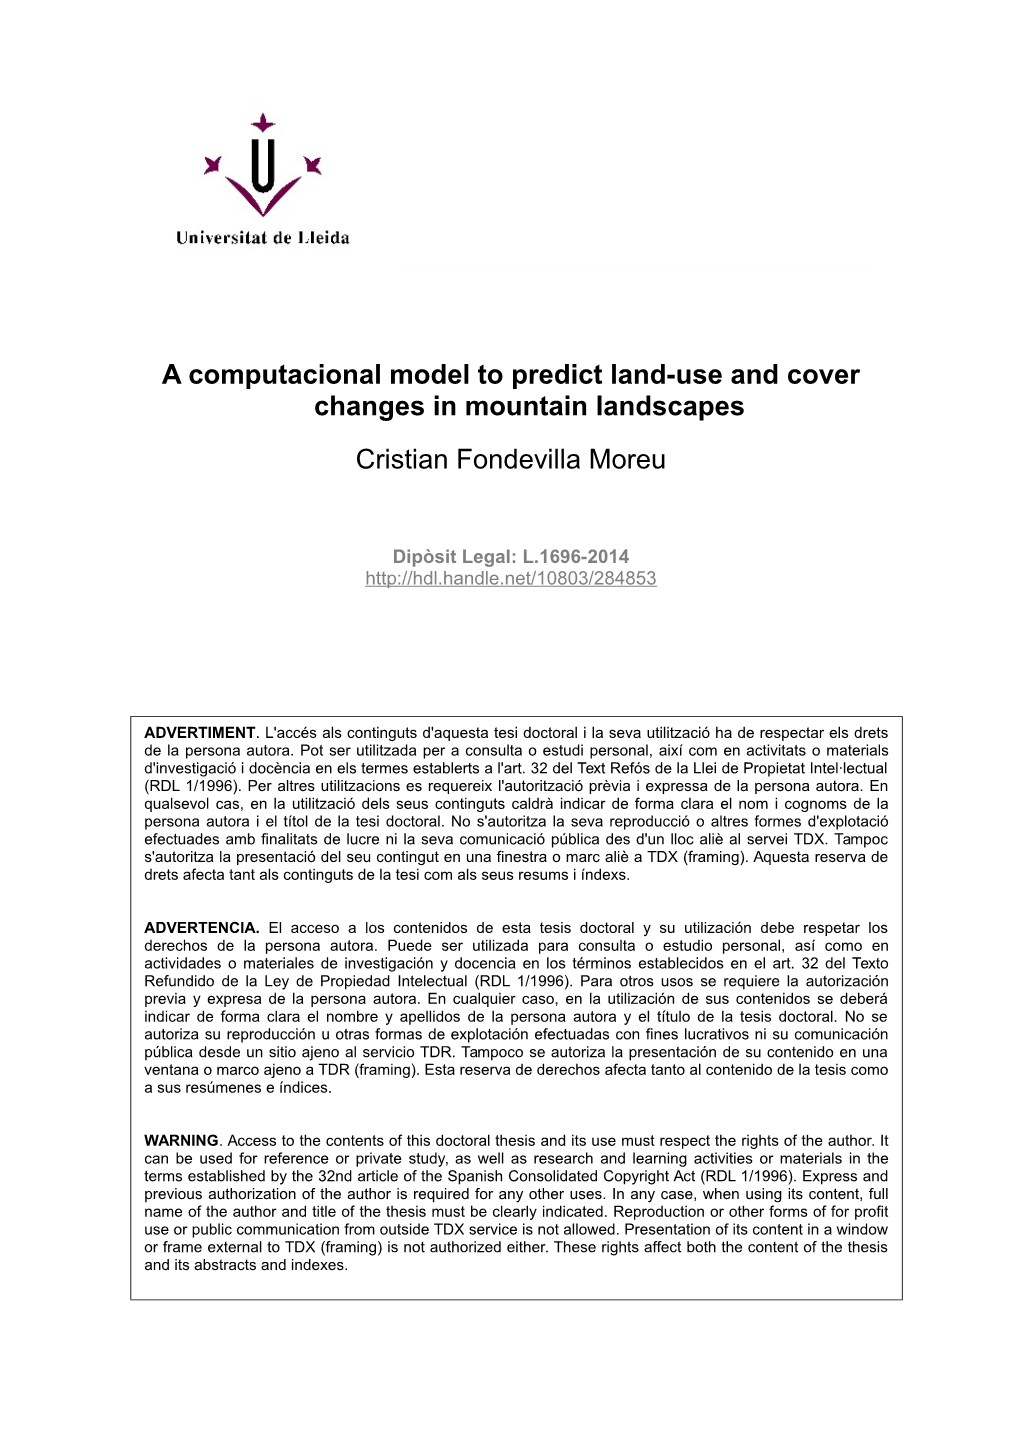 A Computacional Model to Predict Land-Use and Cover Changes in Mountain Landscapes Cristian Fondevilla Moreu